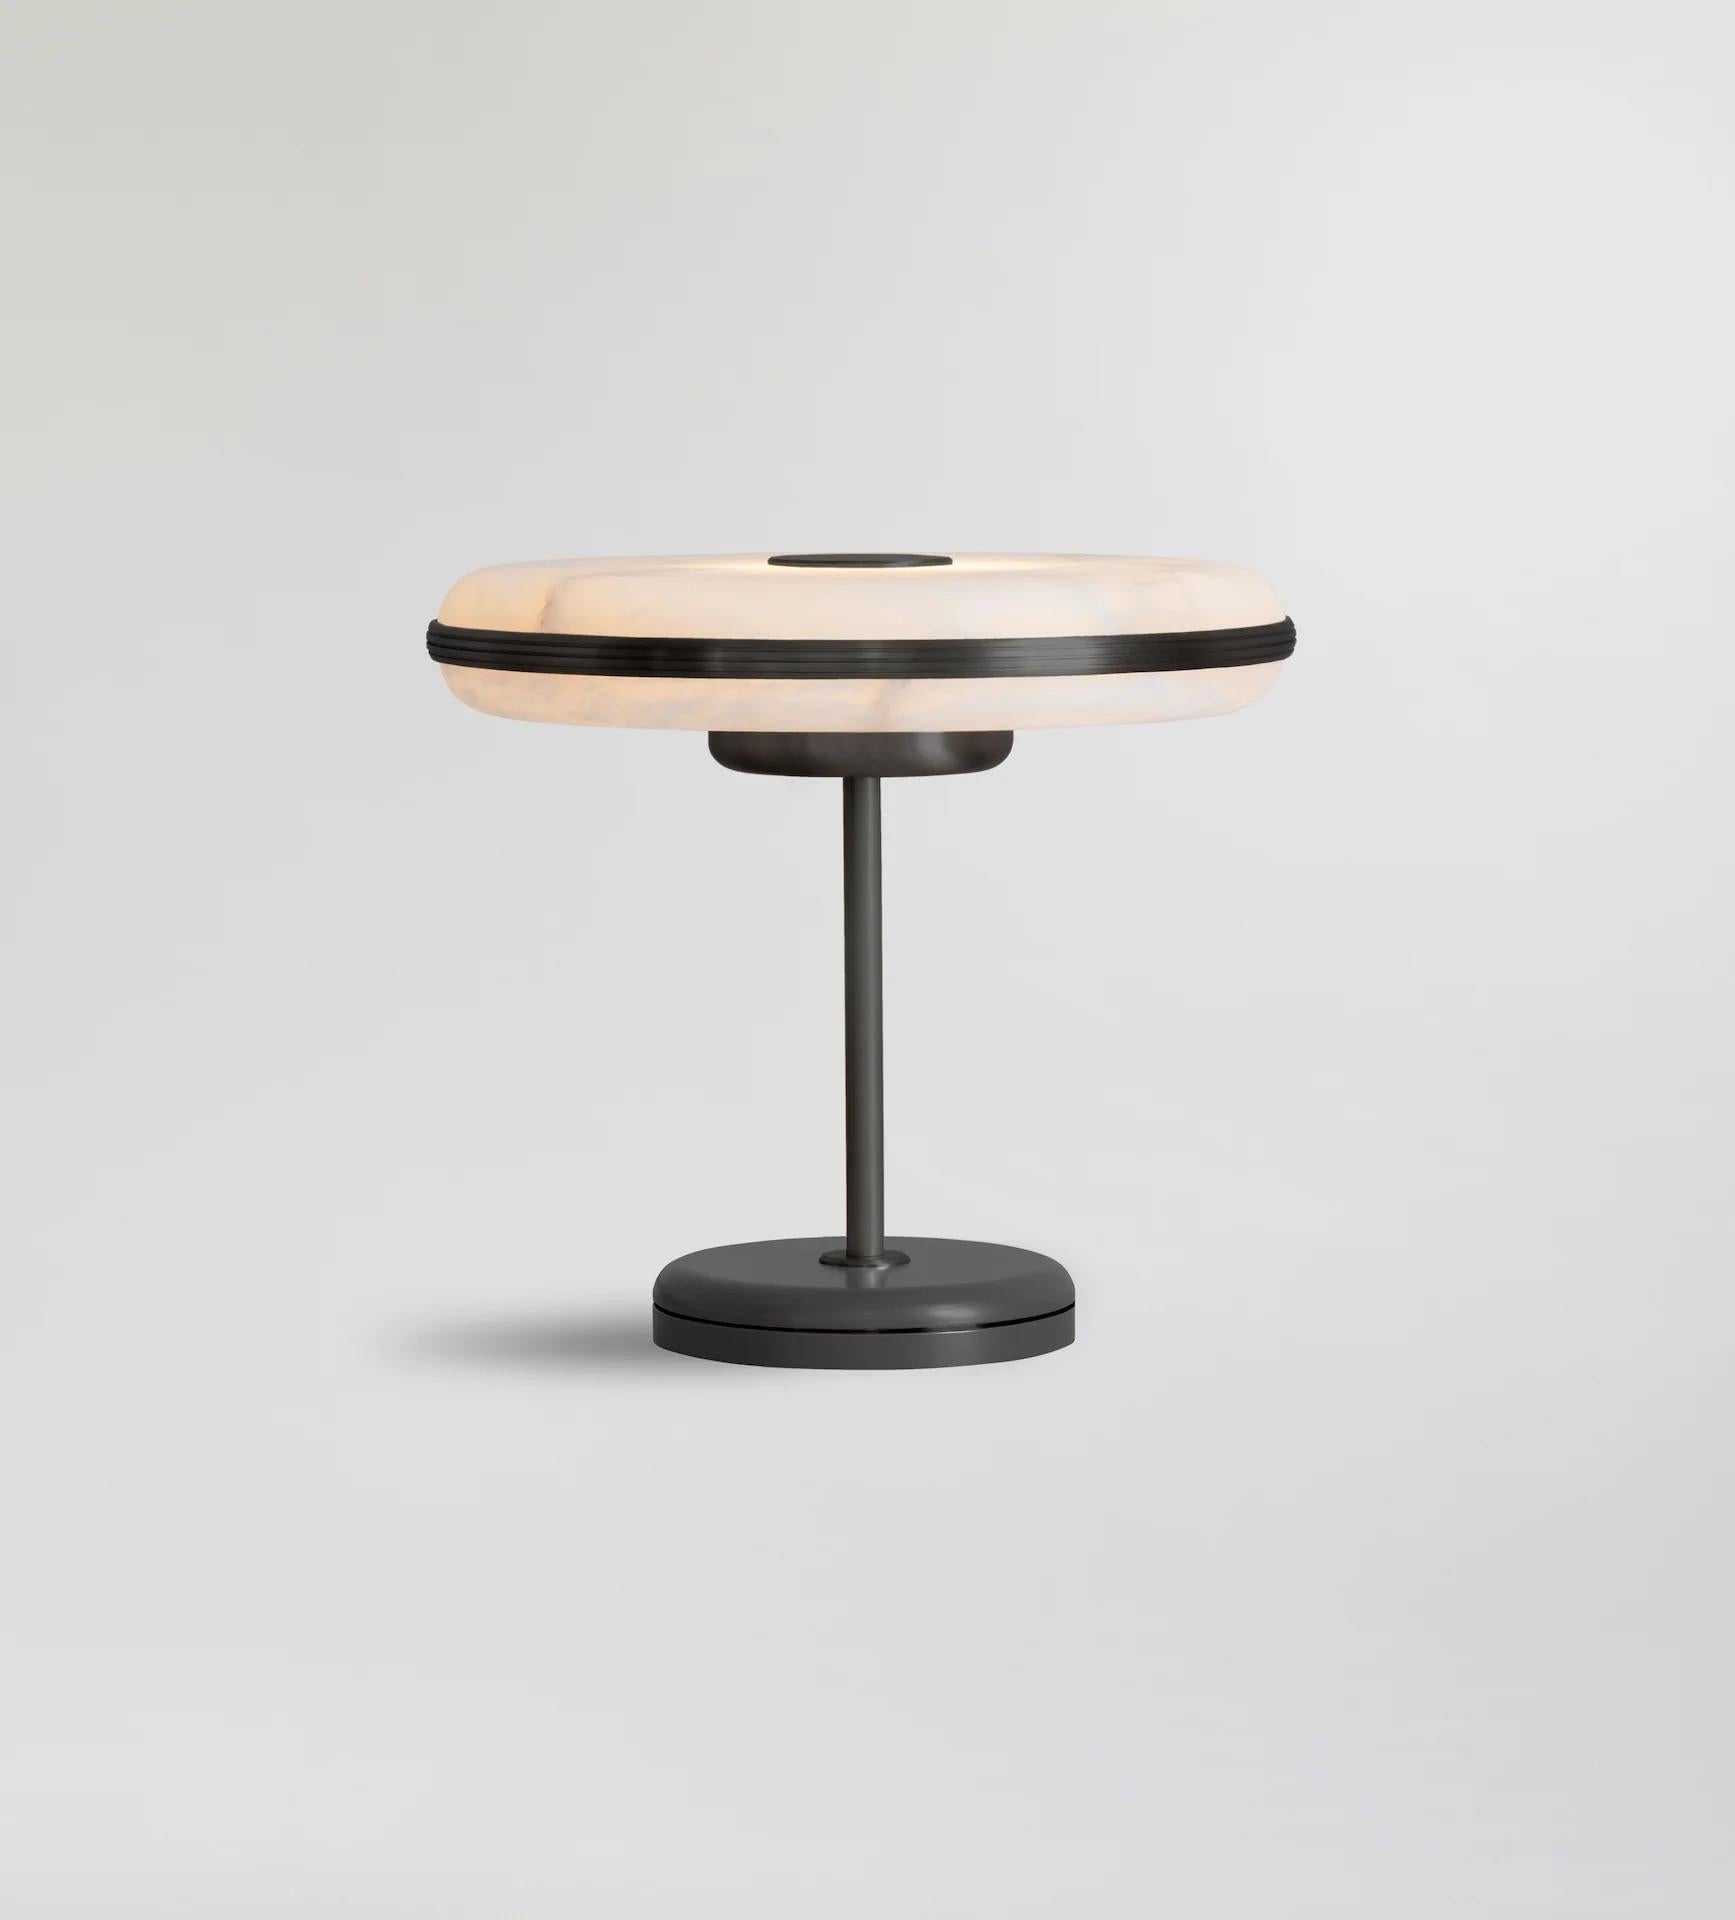 Beran Dark Bronze Large Table Lamp by Bert Frank
Dimensions: Ø 36 x H 32 cm.
Materials: Bronze and alabaster.
Base finish: Satin black.

Available in two different sizes. Available in different finishes and materials. Please contact us. 

The